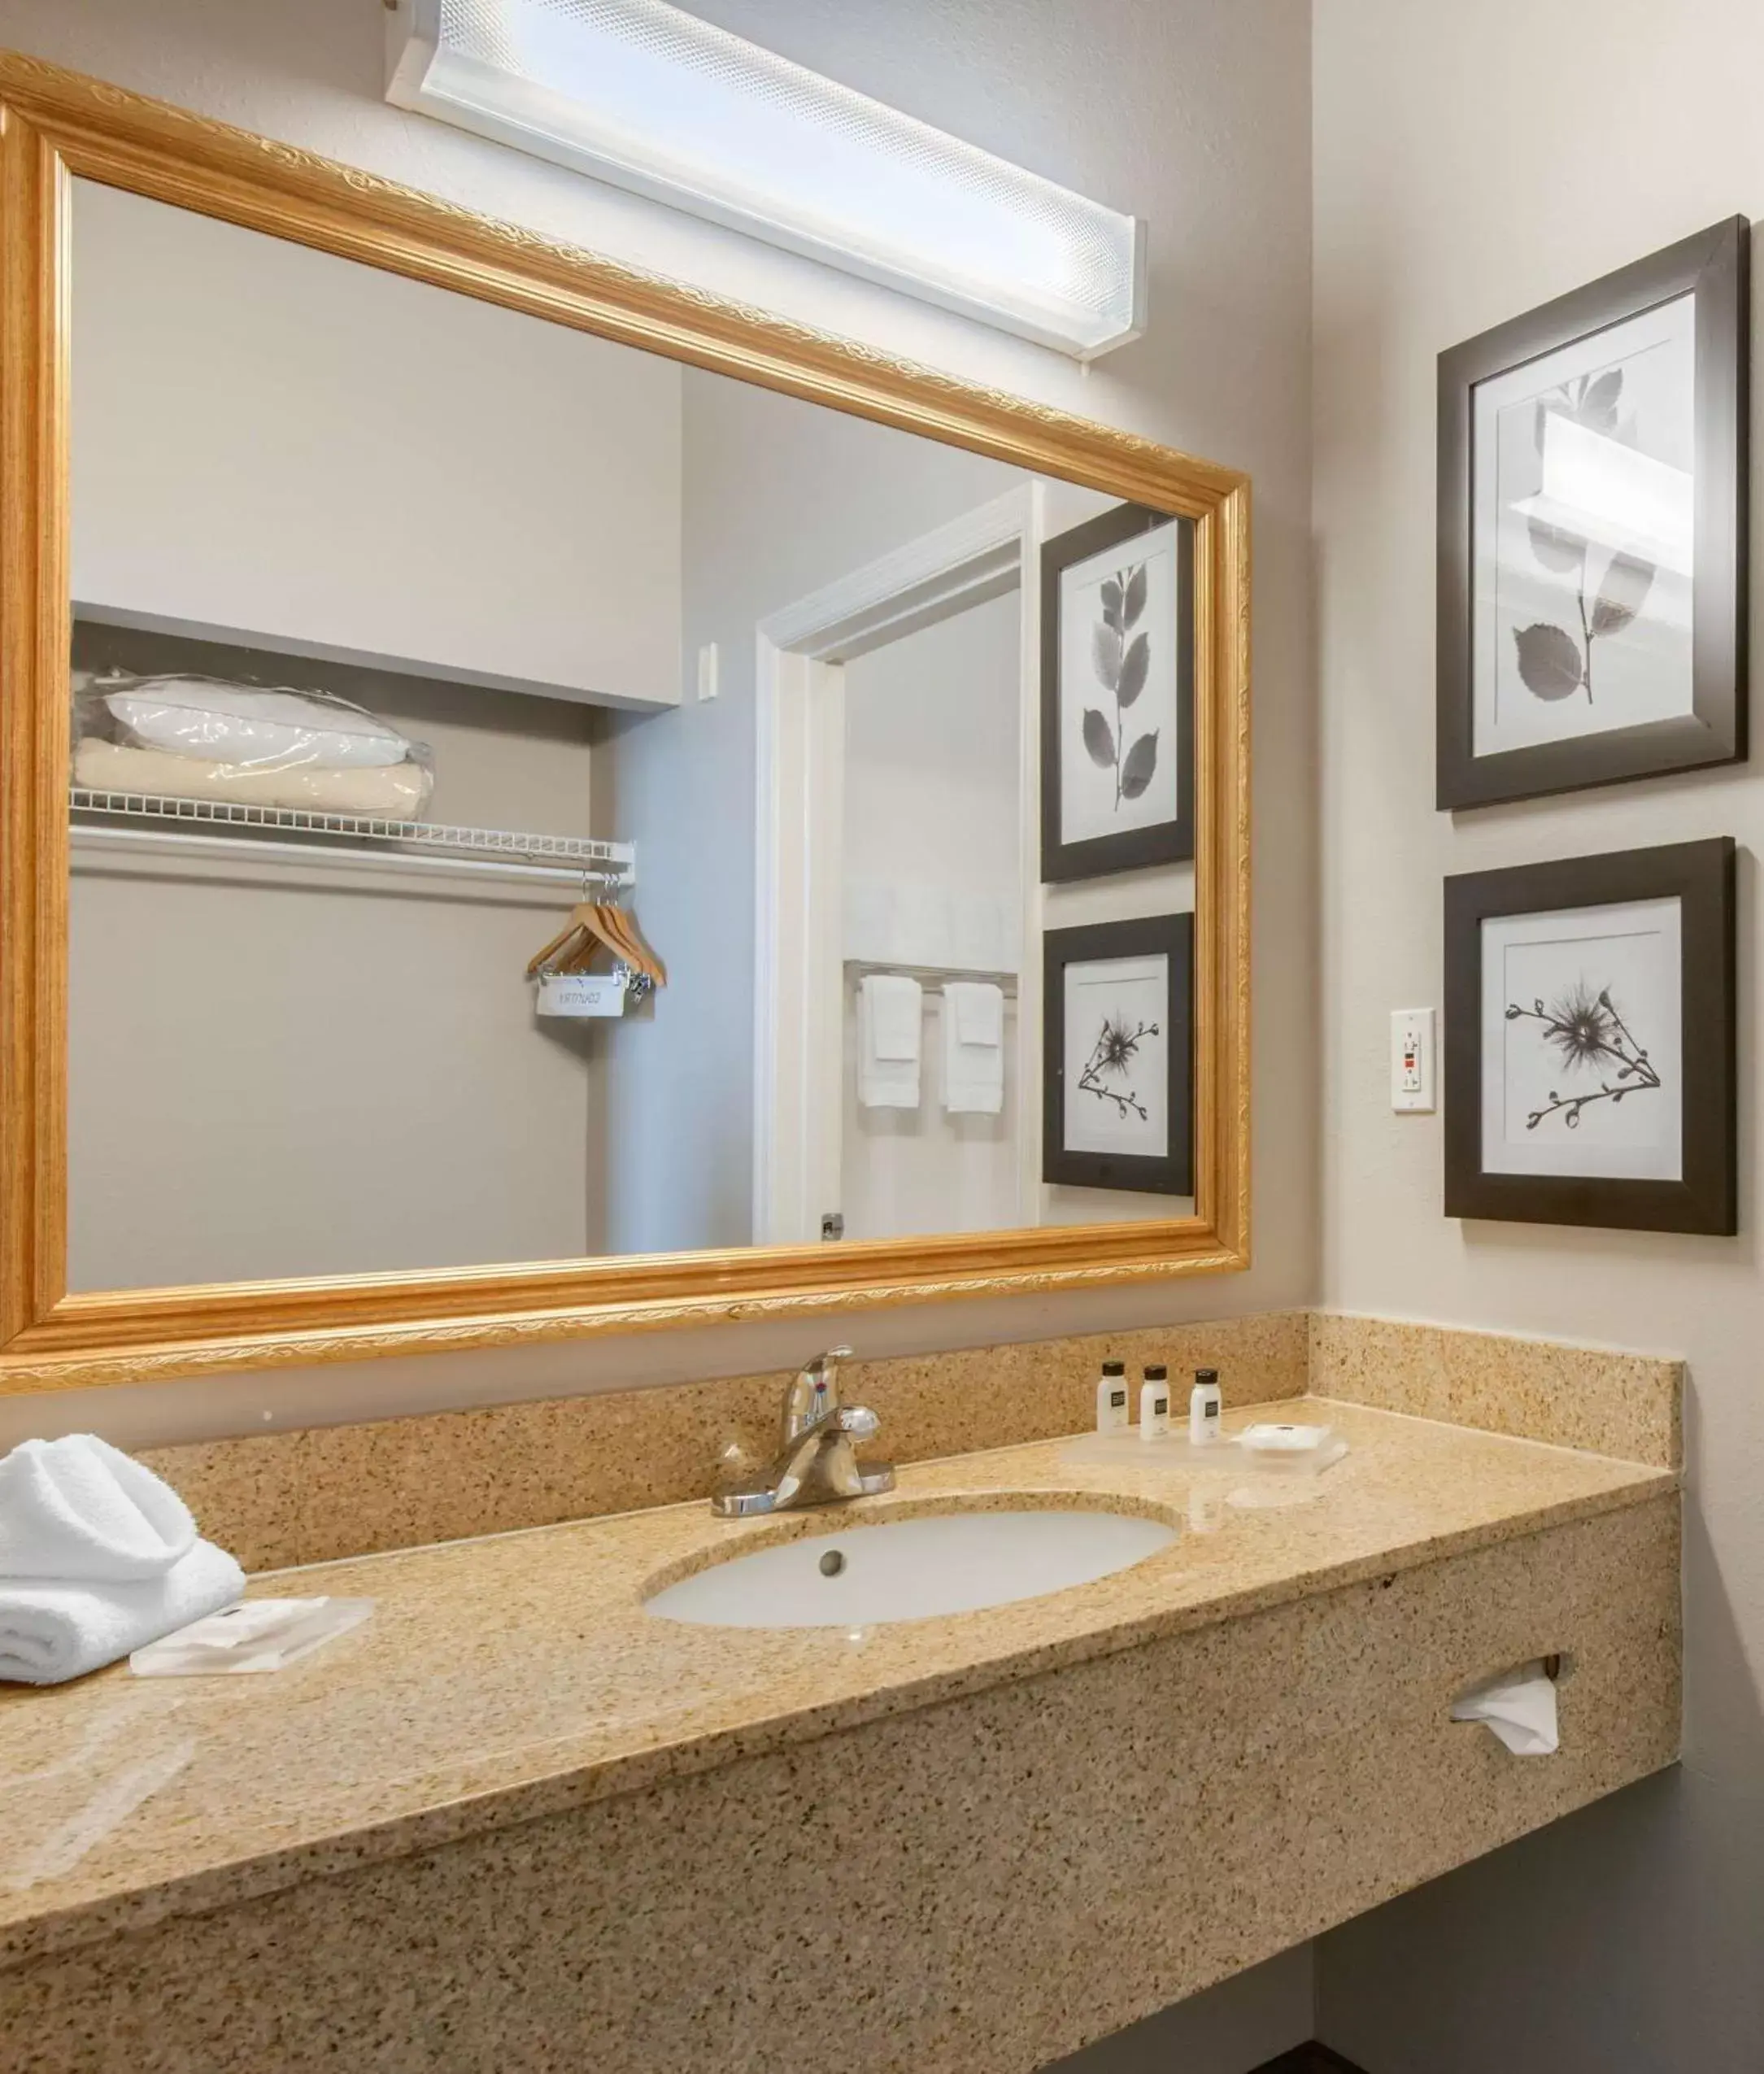 Bathroom in Country Inn & Suites by Radisson, Port Canaveral, FL